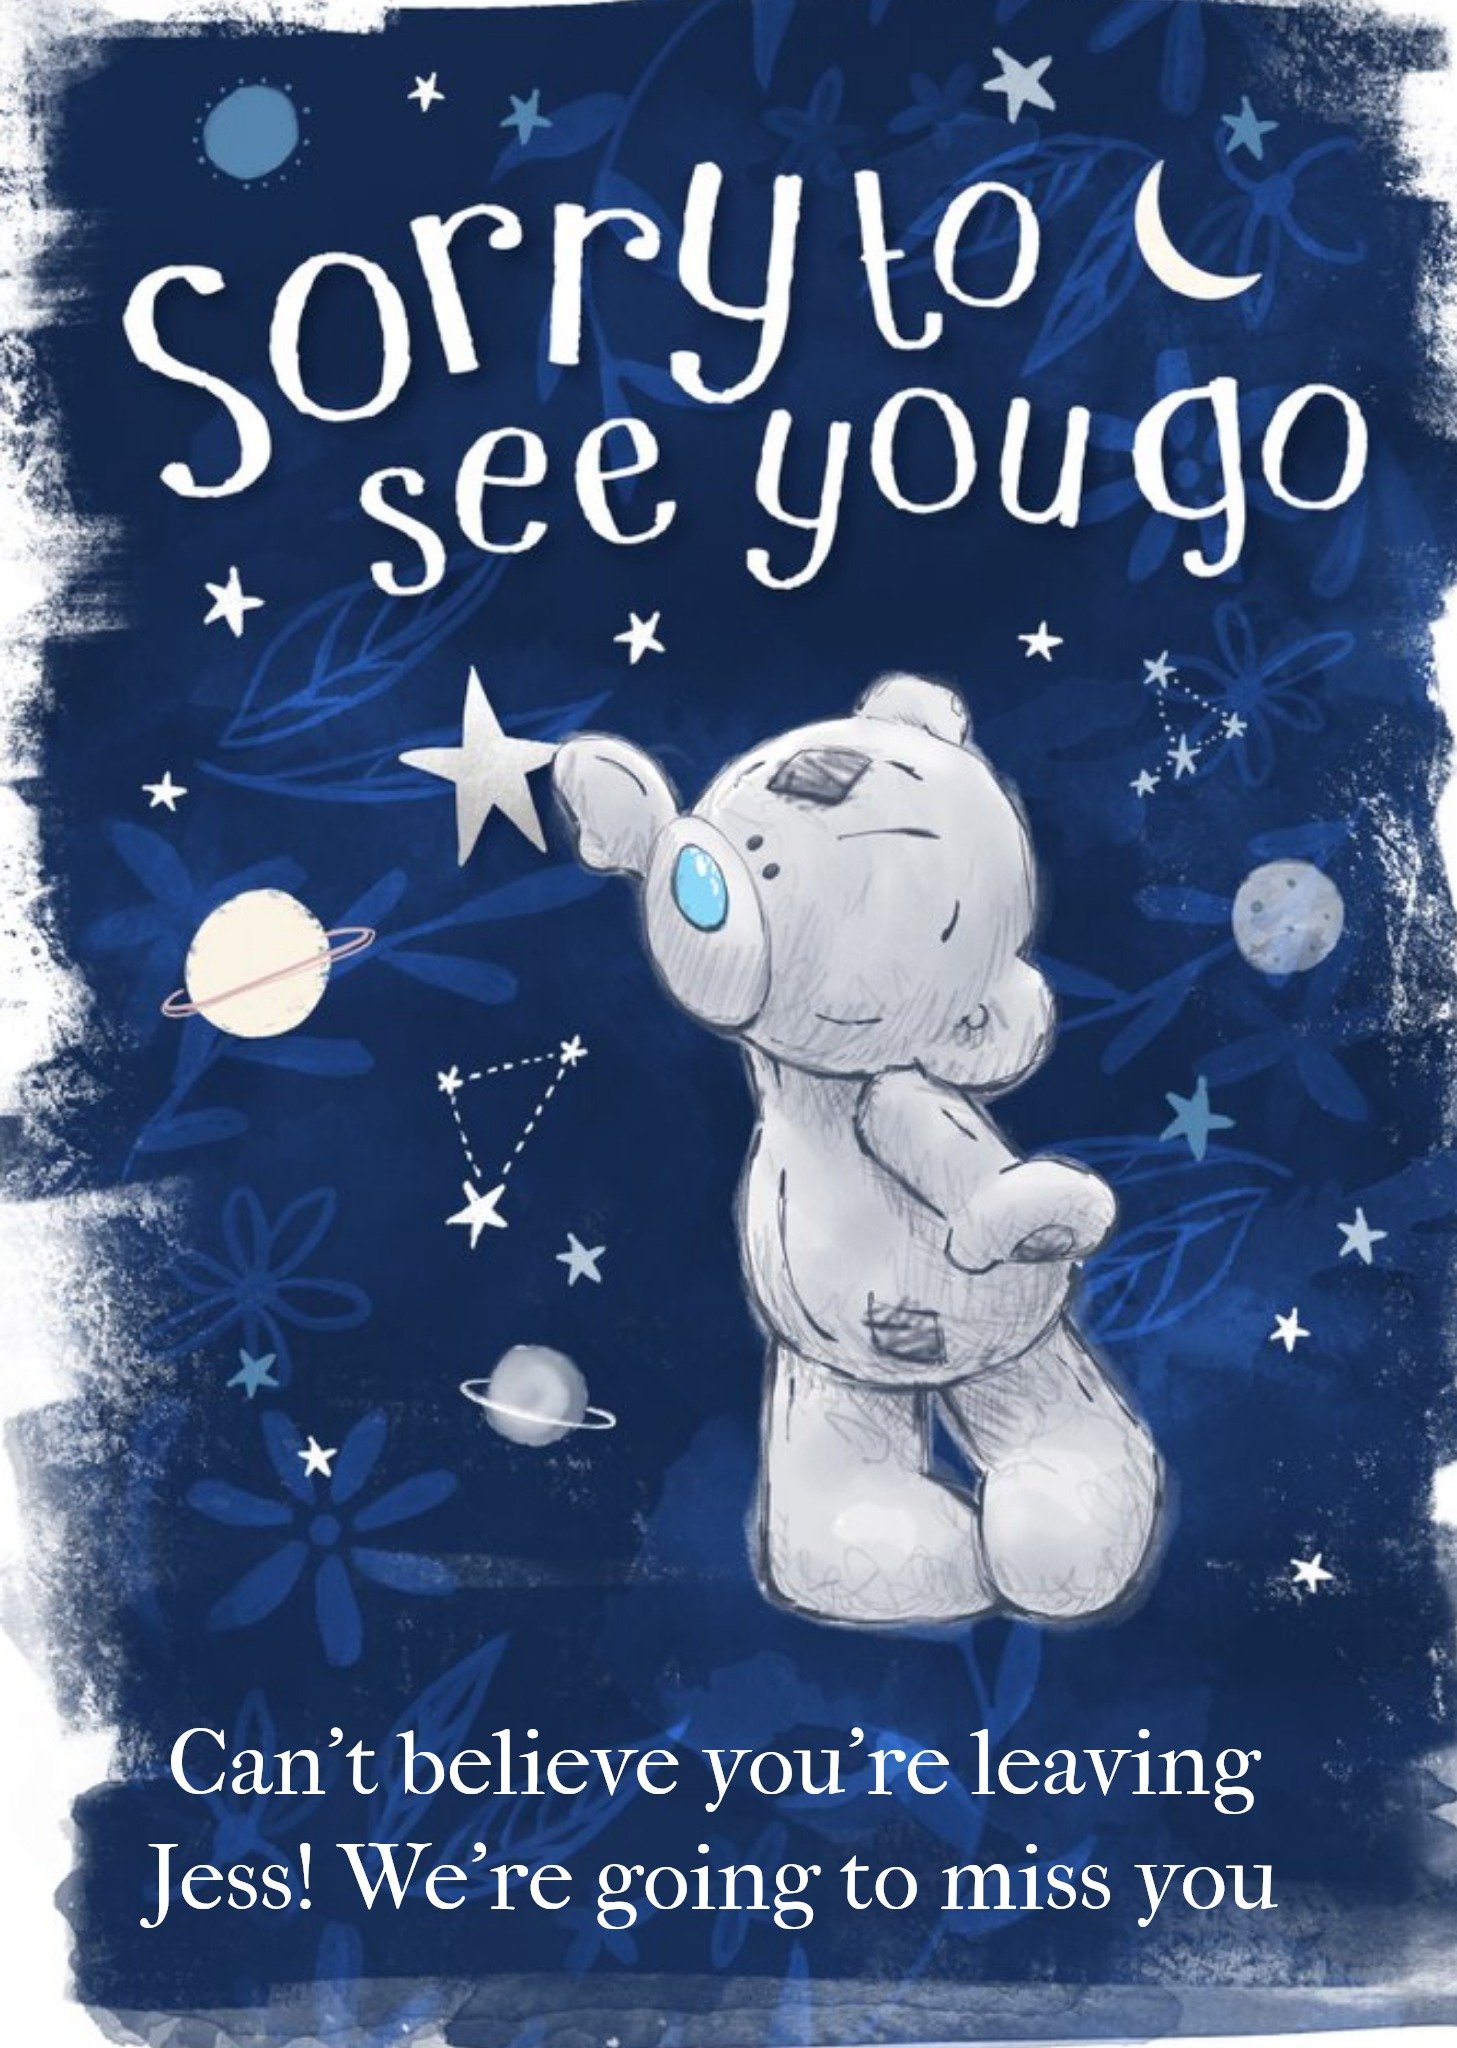 Tiny Tatty Teddy Tatty Teddy Stars And Constellations Sorry To See You Go Leaving Card Ecard